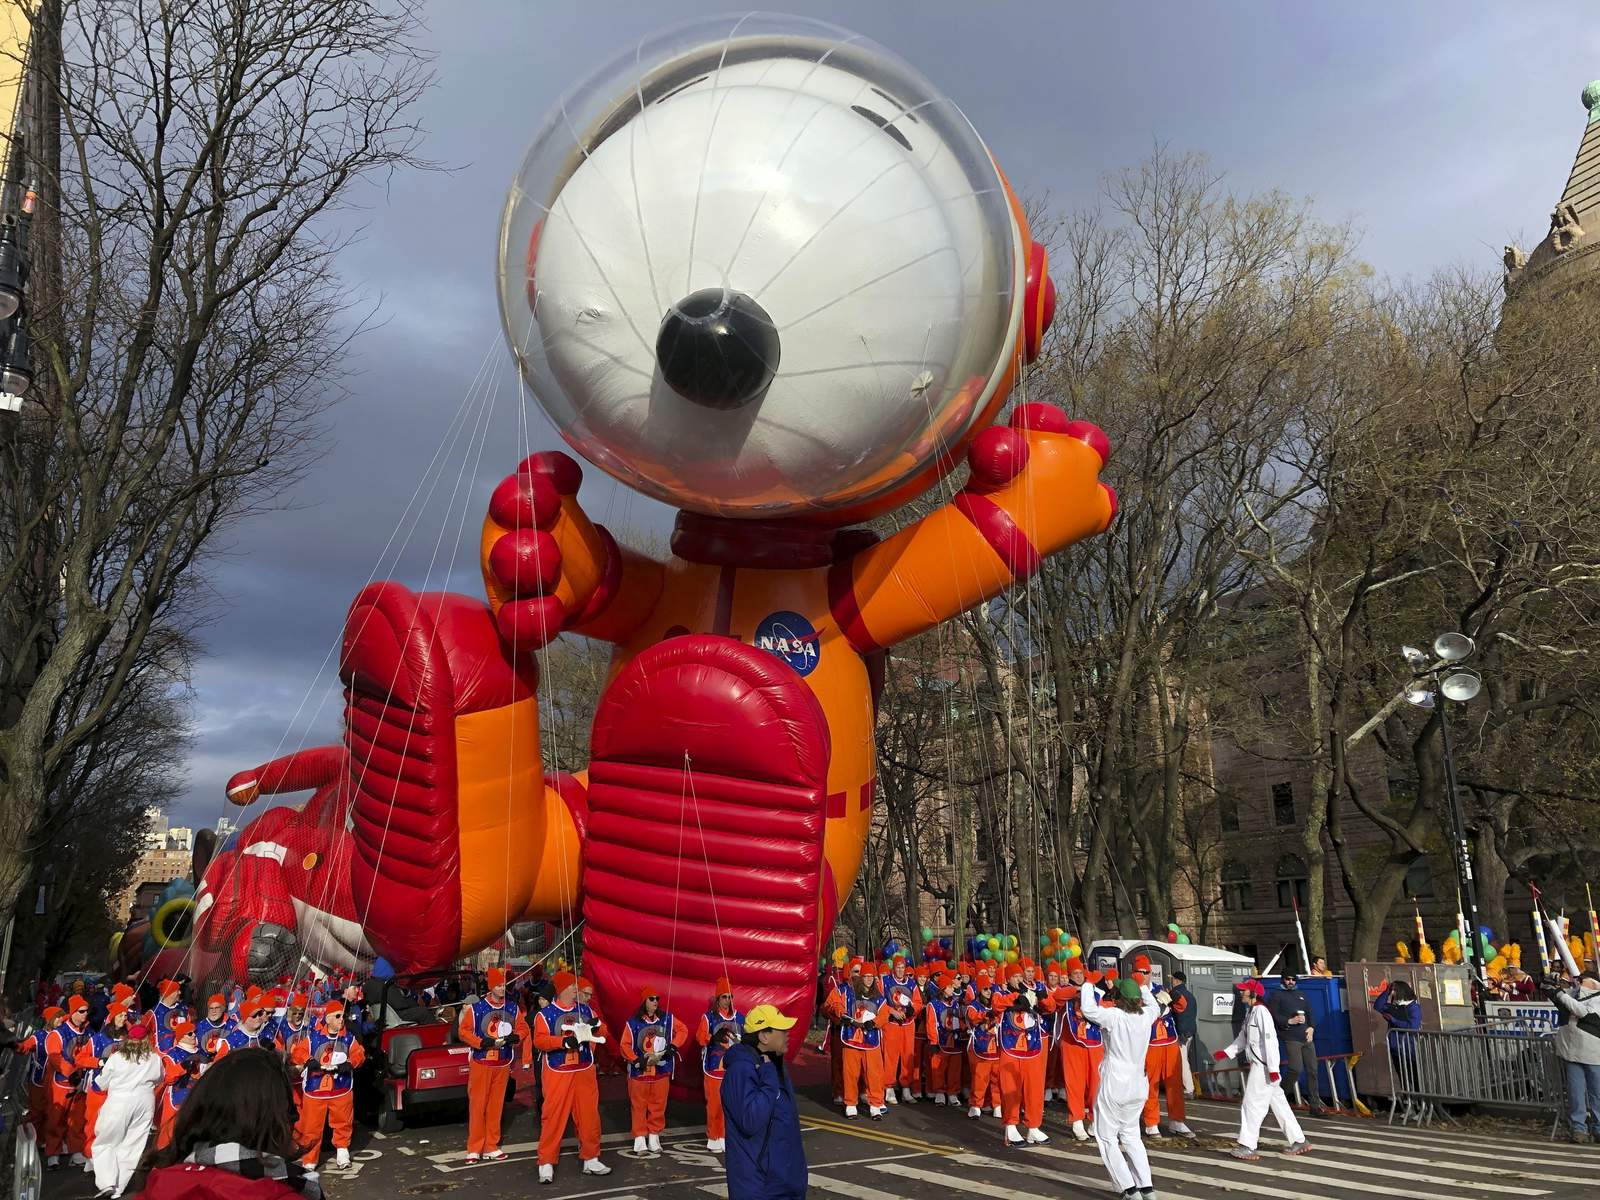 2020 Macy's Thanksgiving Day Parade Live Stream Free on Reddit How to